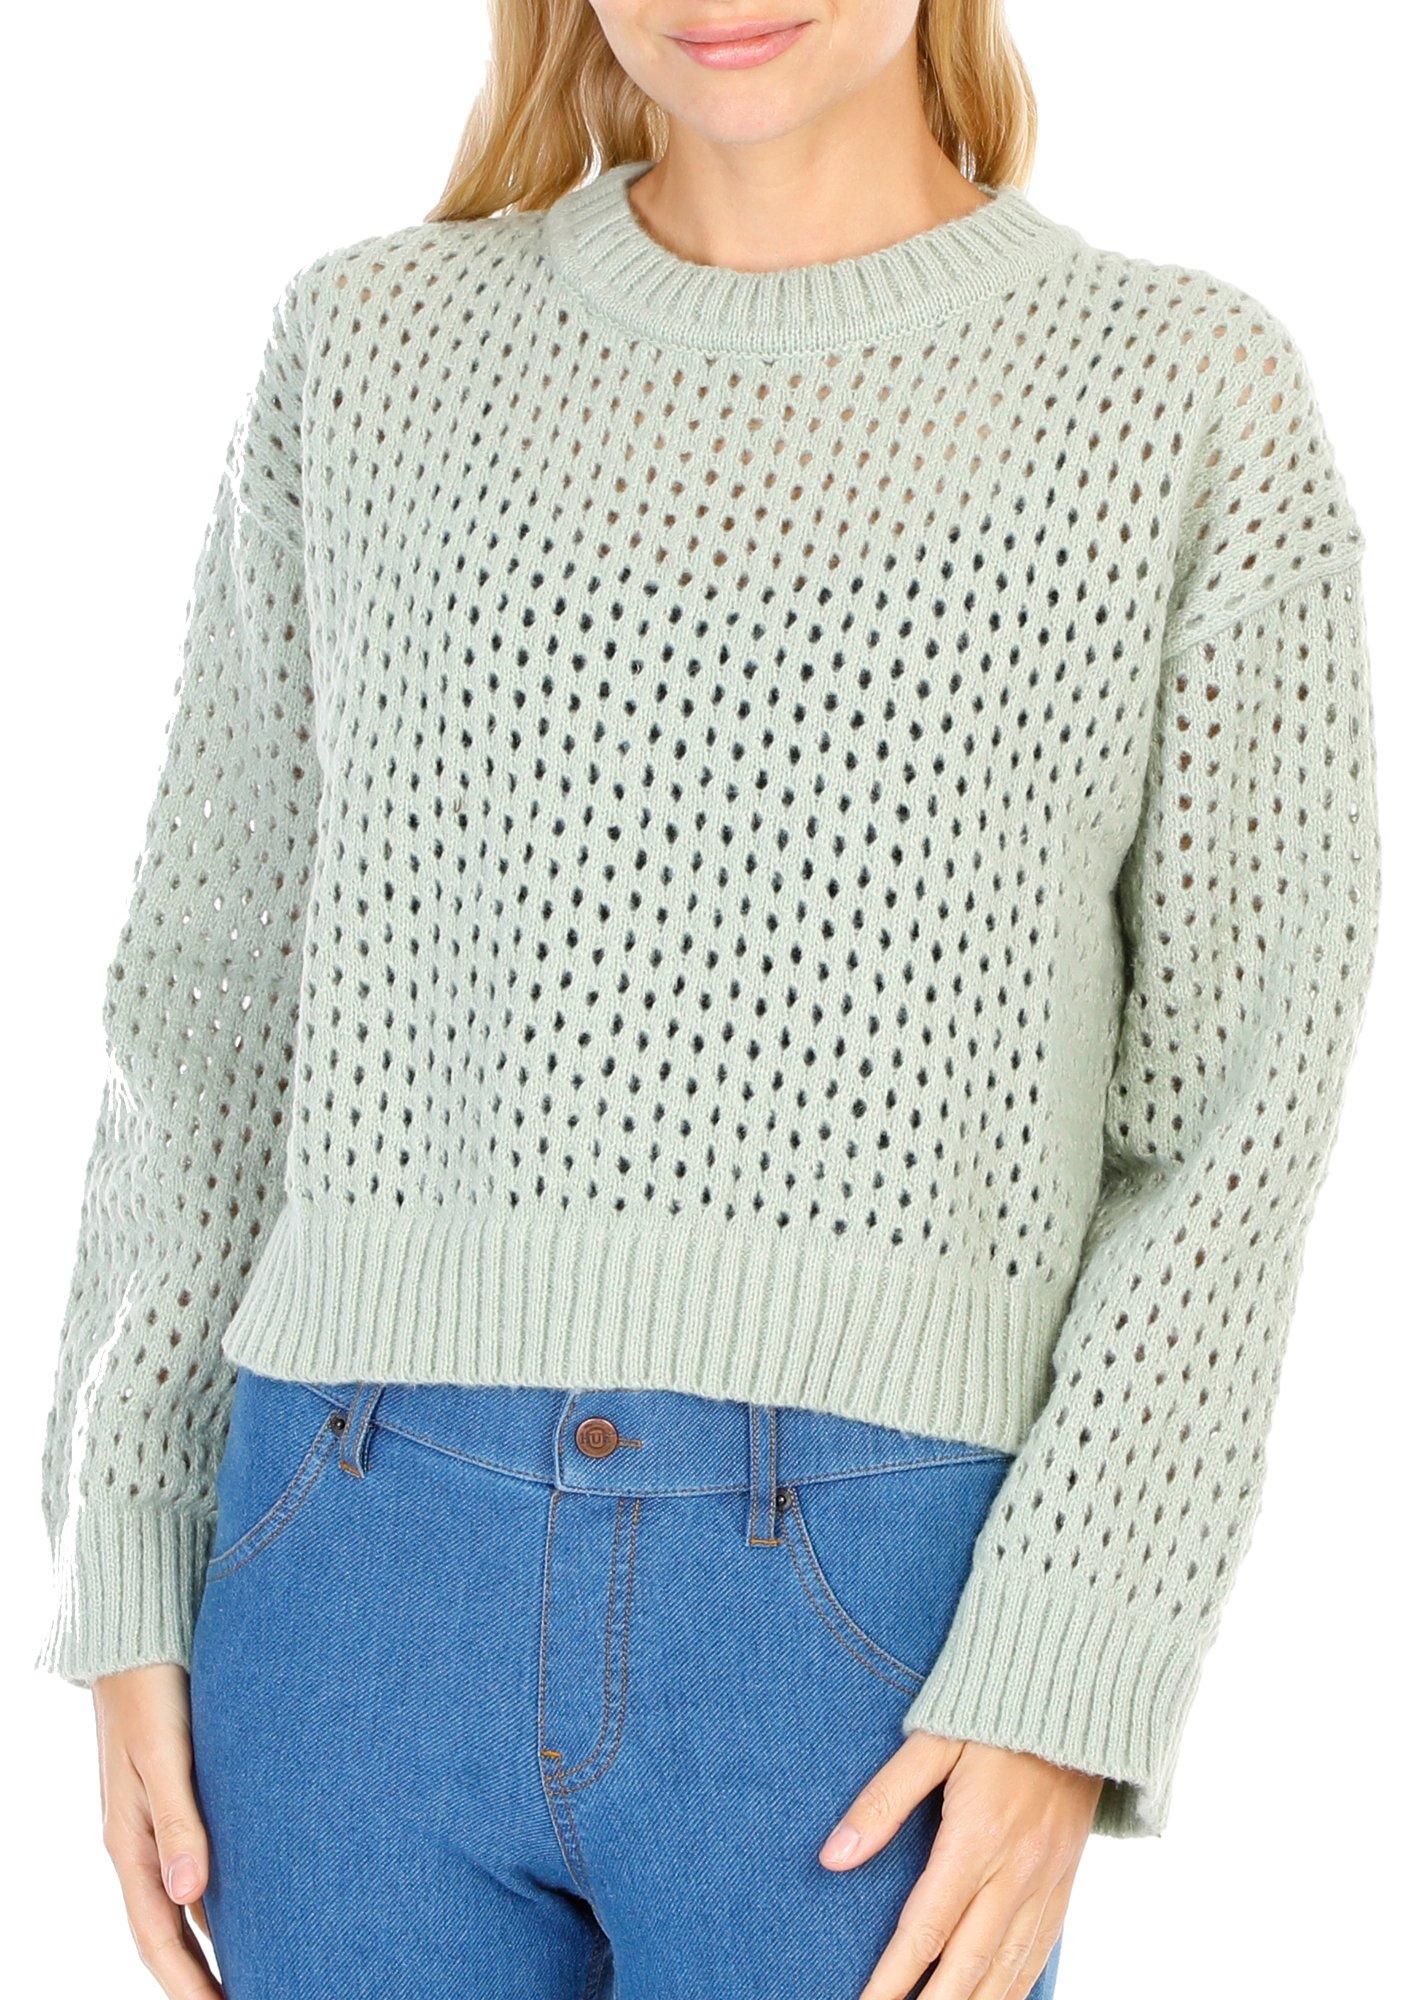 Juniors Knit Cropped Sweater